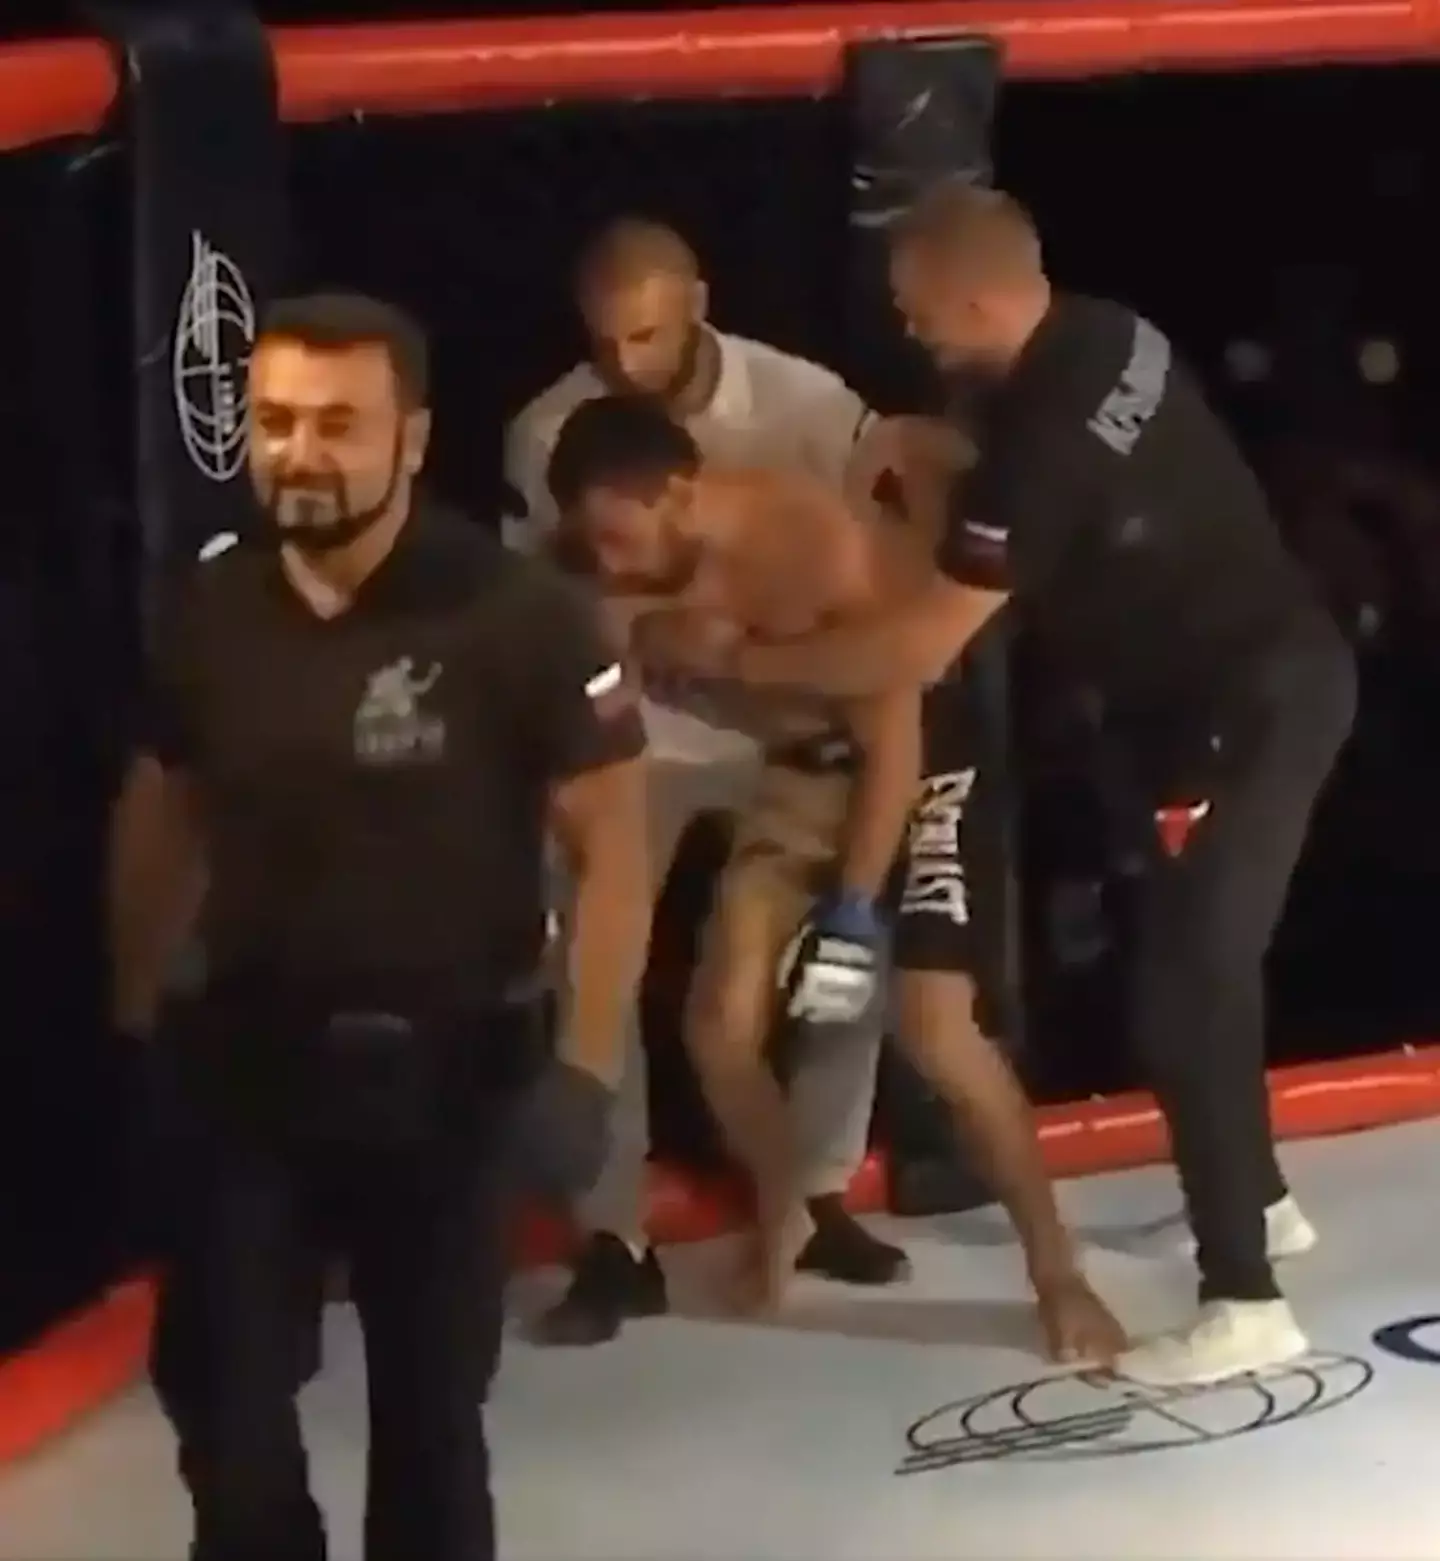 The fighter was left briefly unconscious by the referee (Image: Twitter)